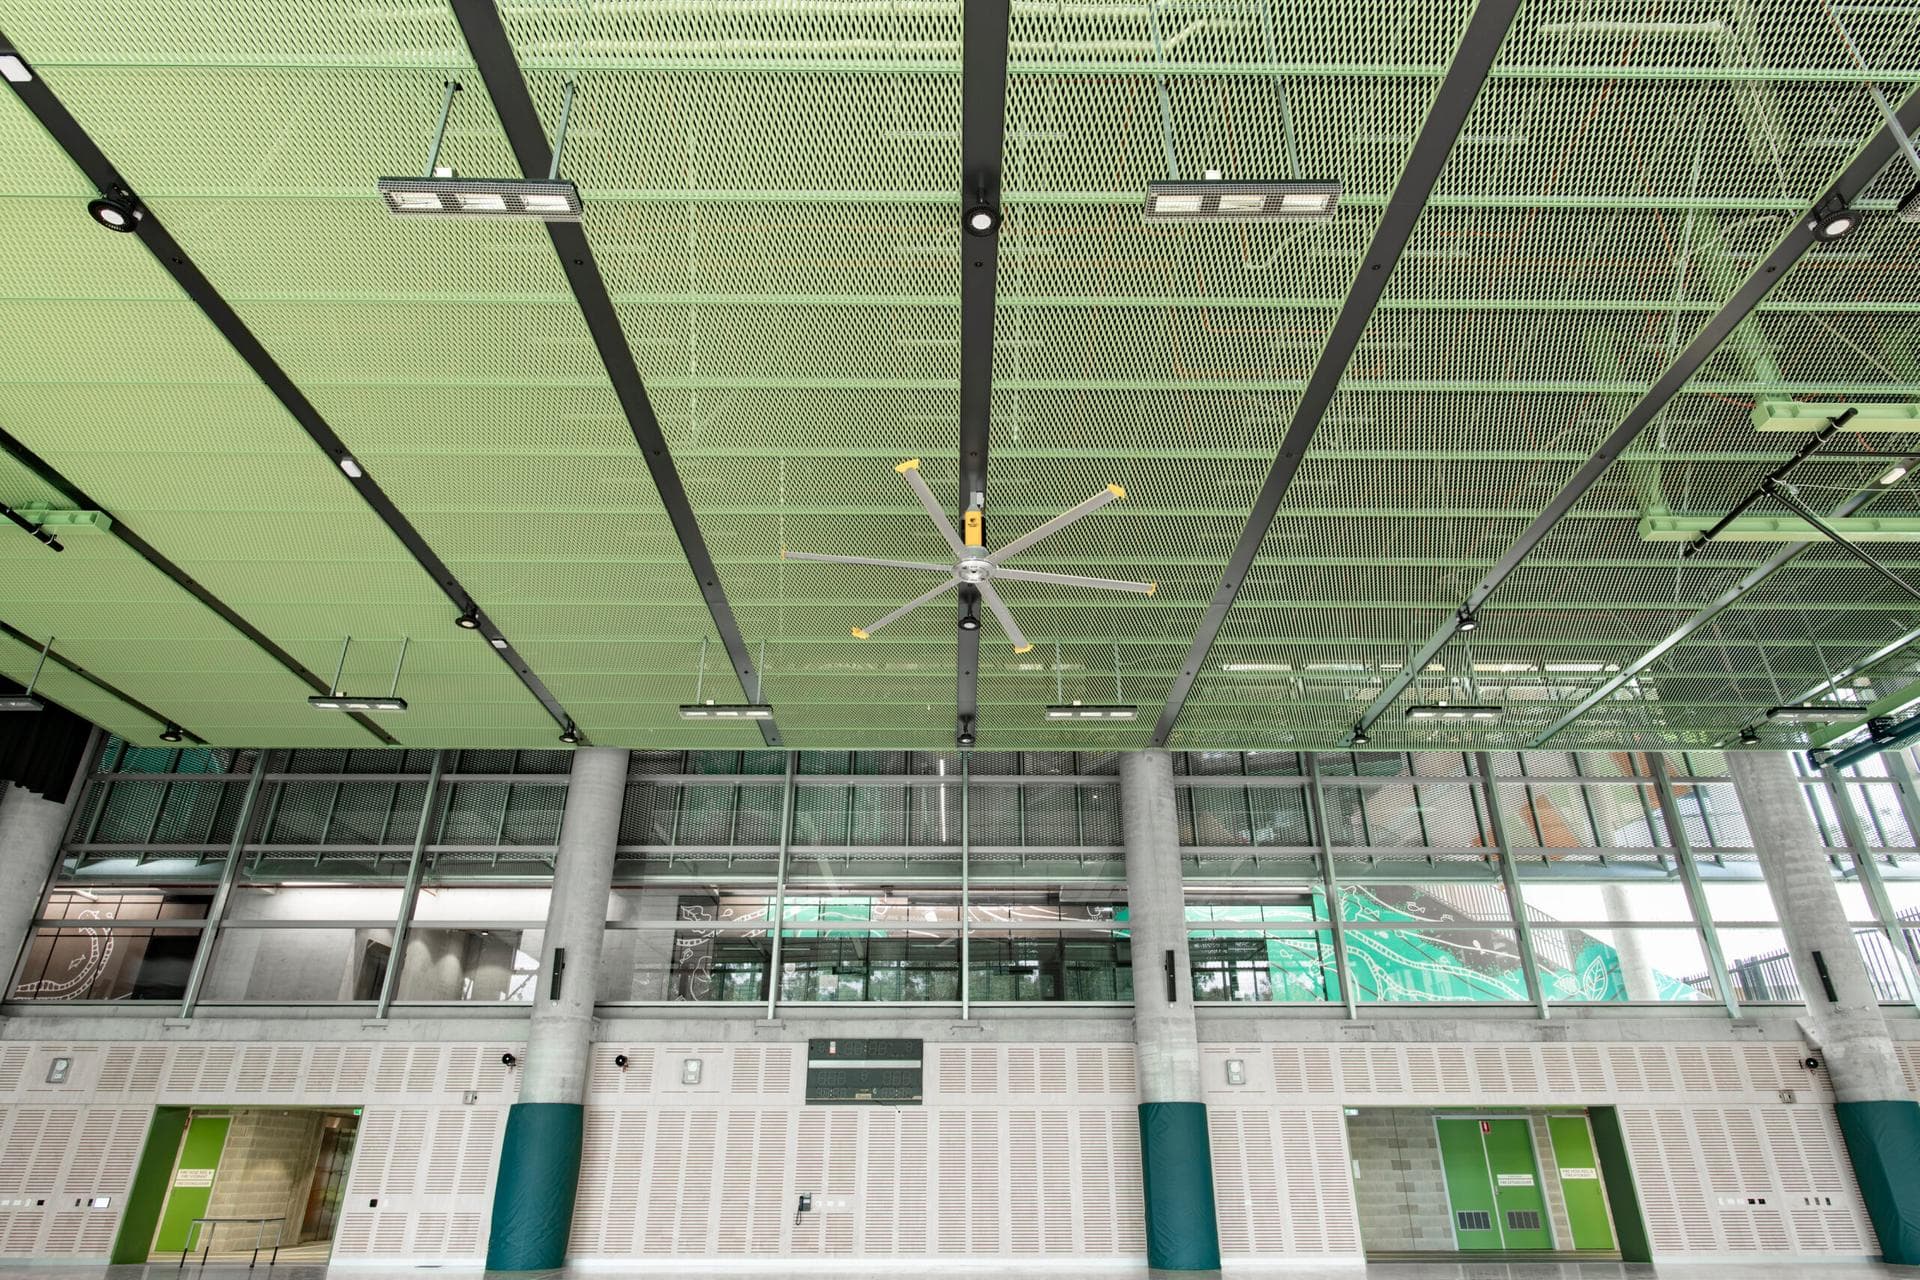 Stainless Steel Metal Ceilings for Schools by Network Architectural